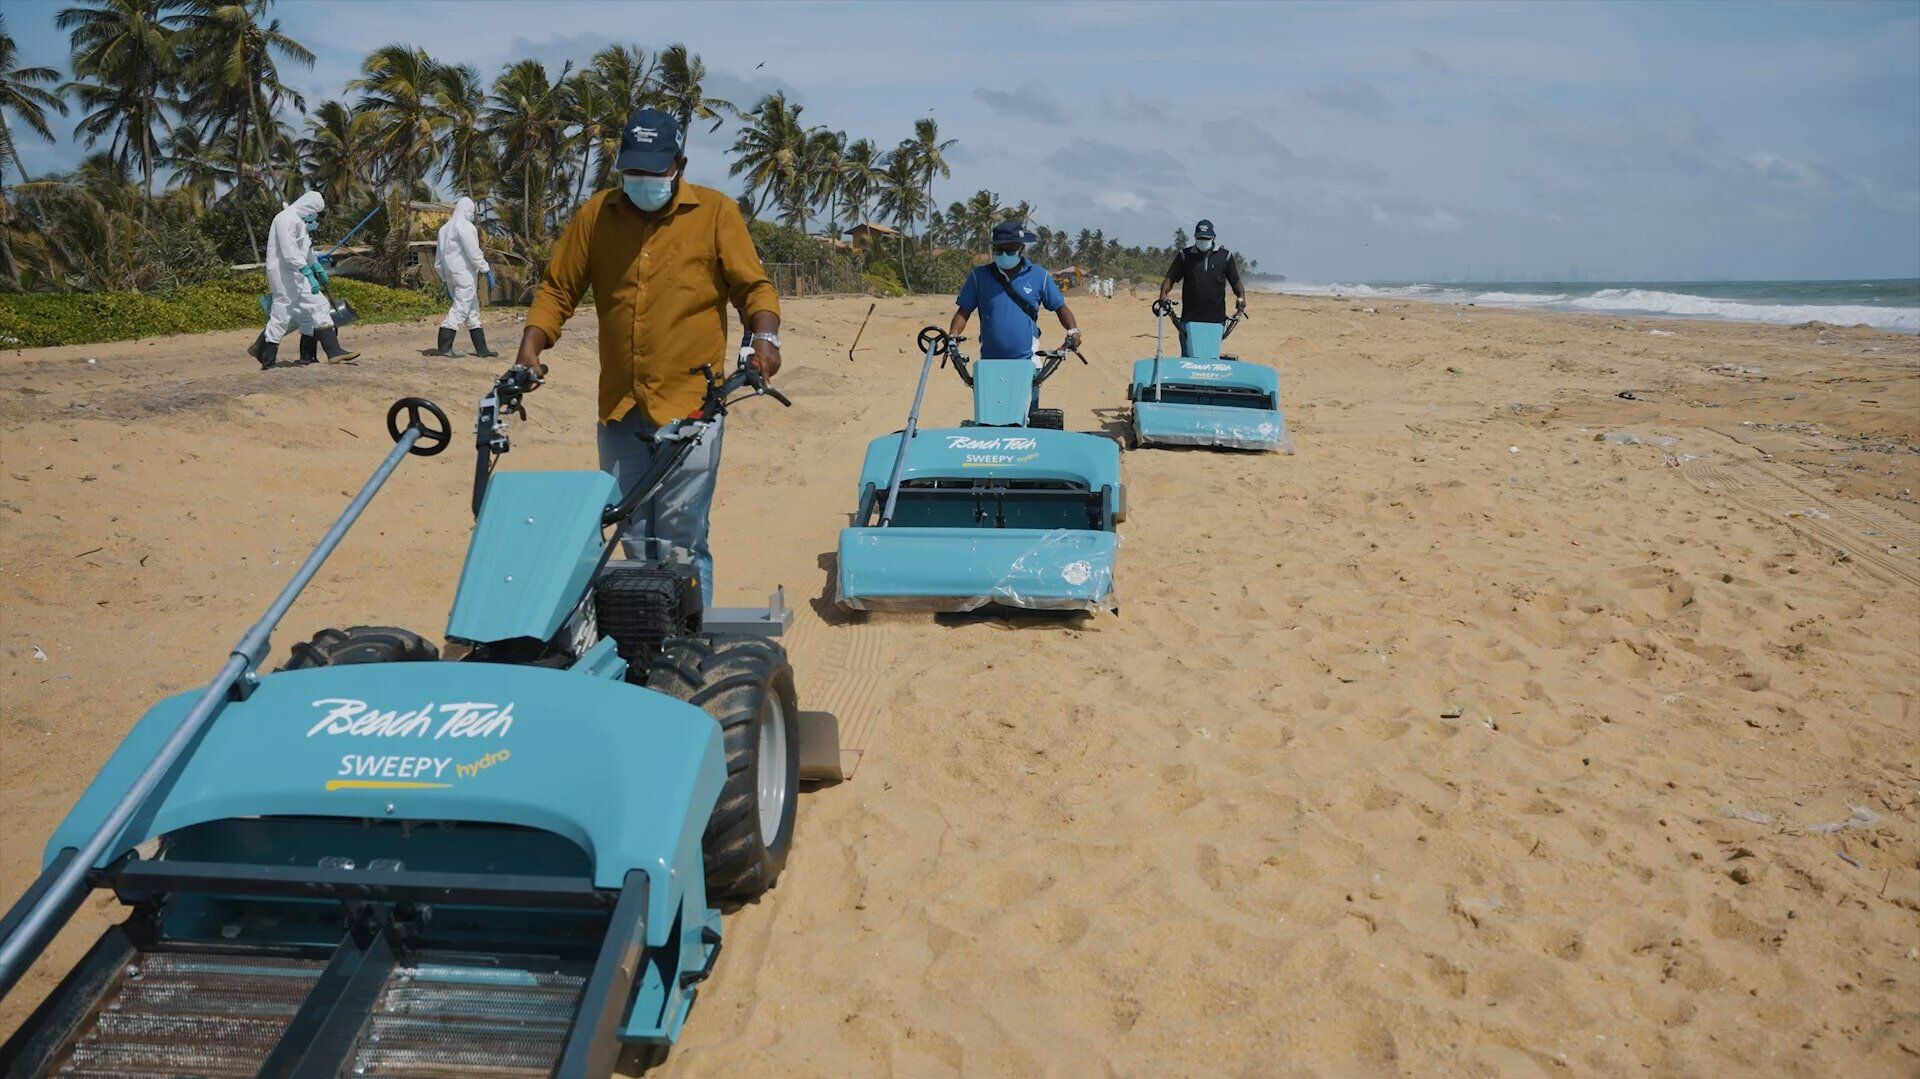 Three BeachTech beach cleaners are used on the beach of Sri Lanka to sift nurdles out of the sand